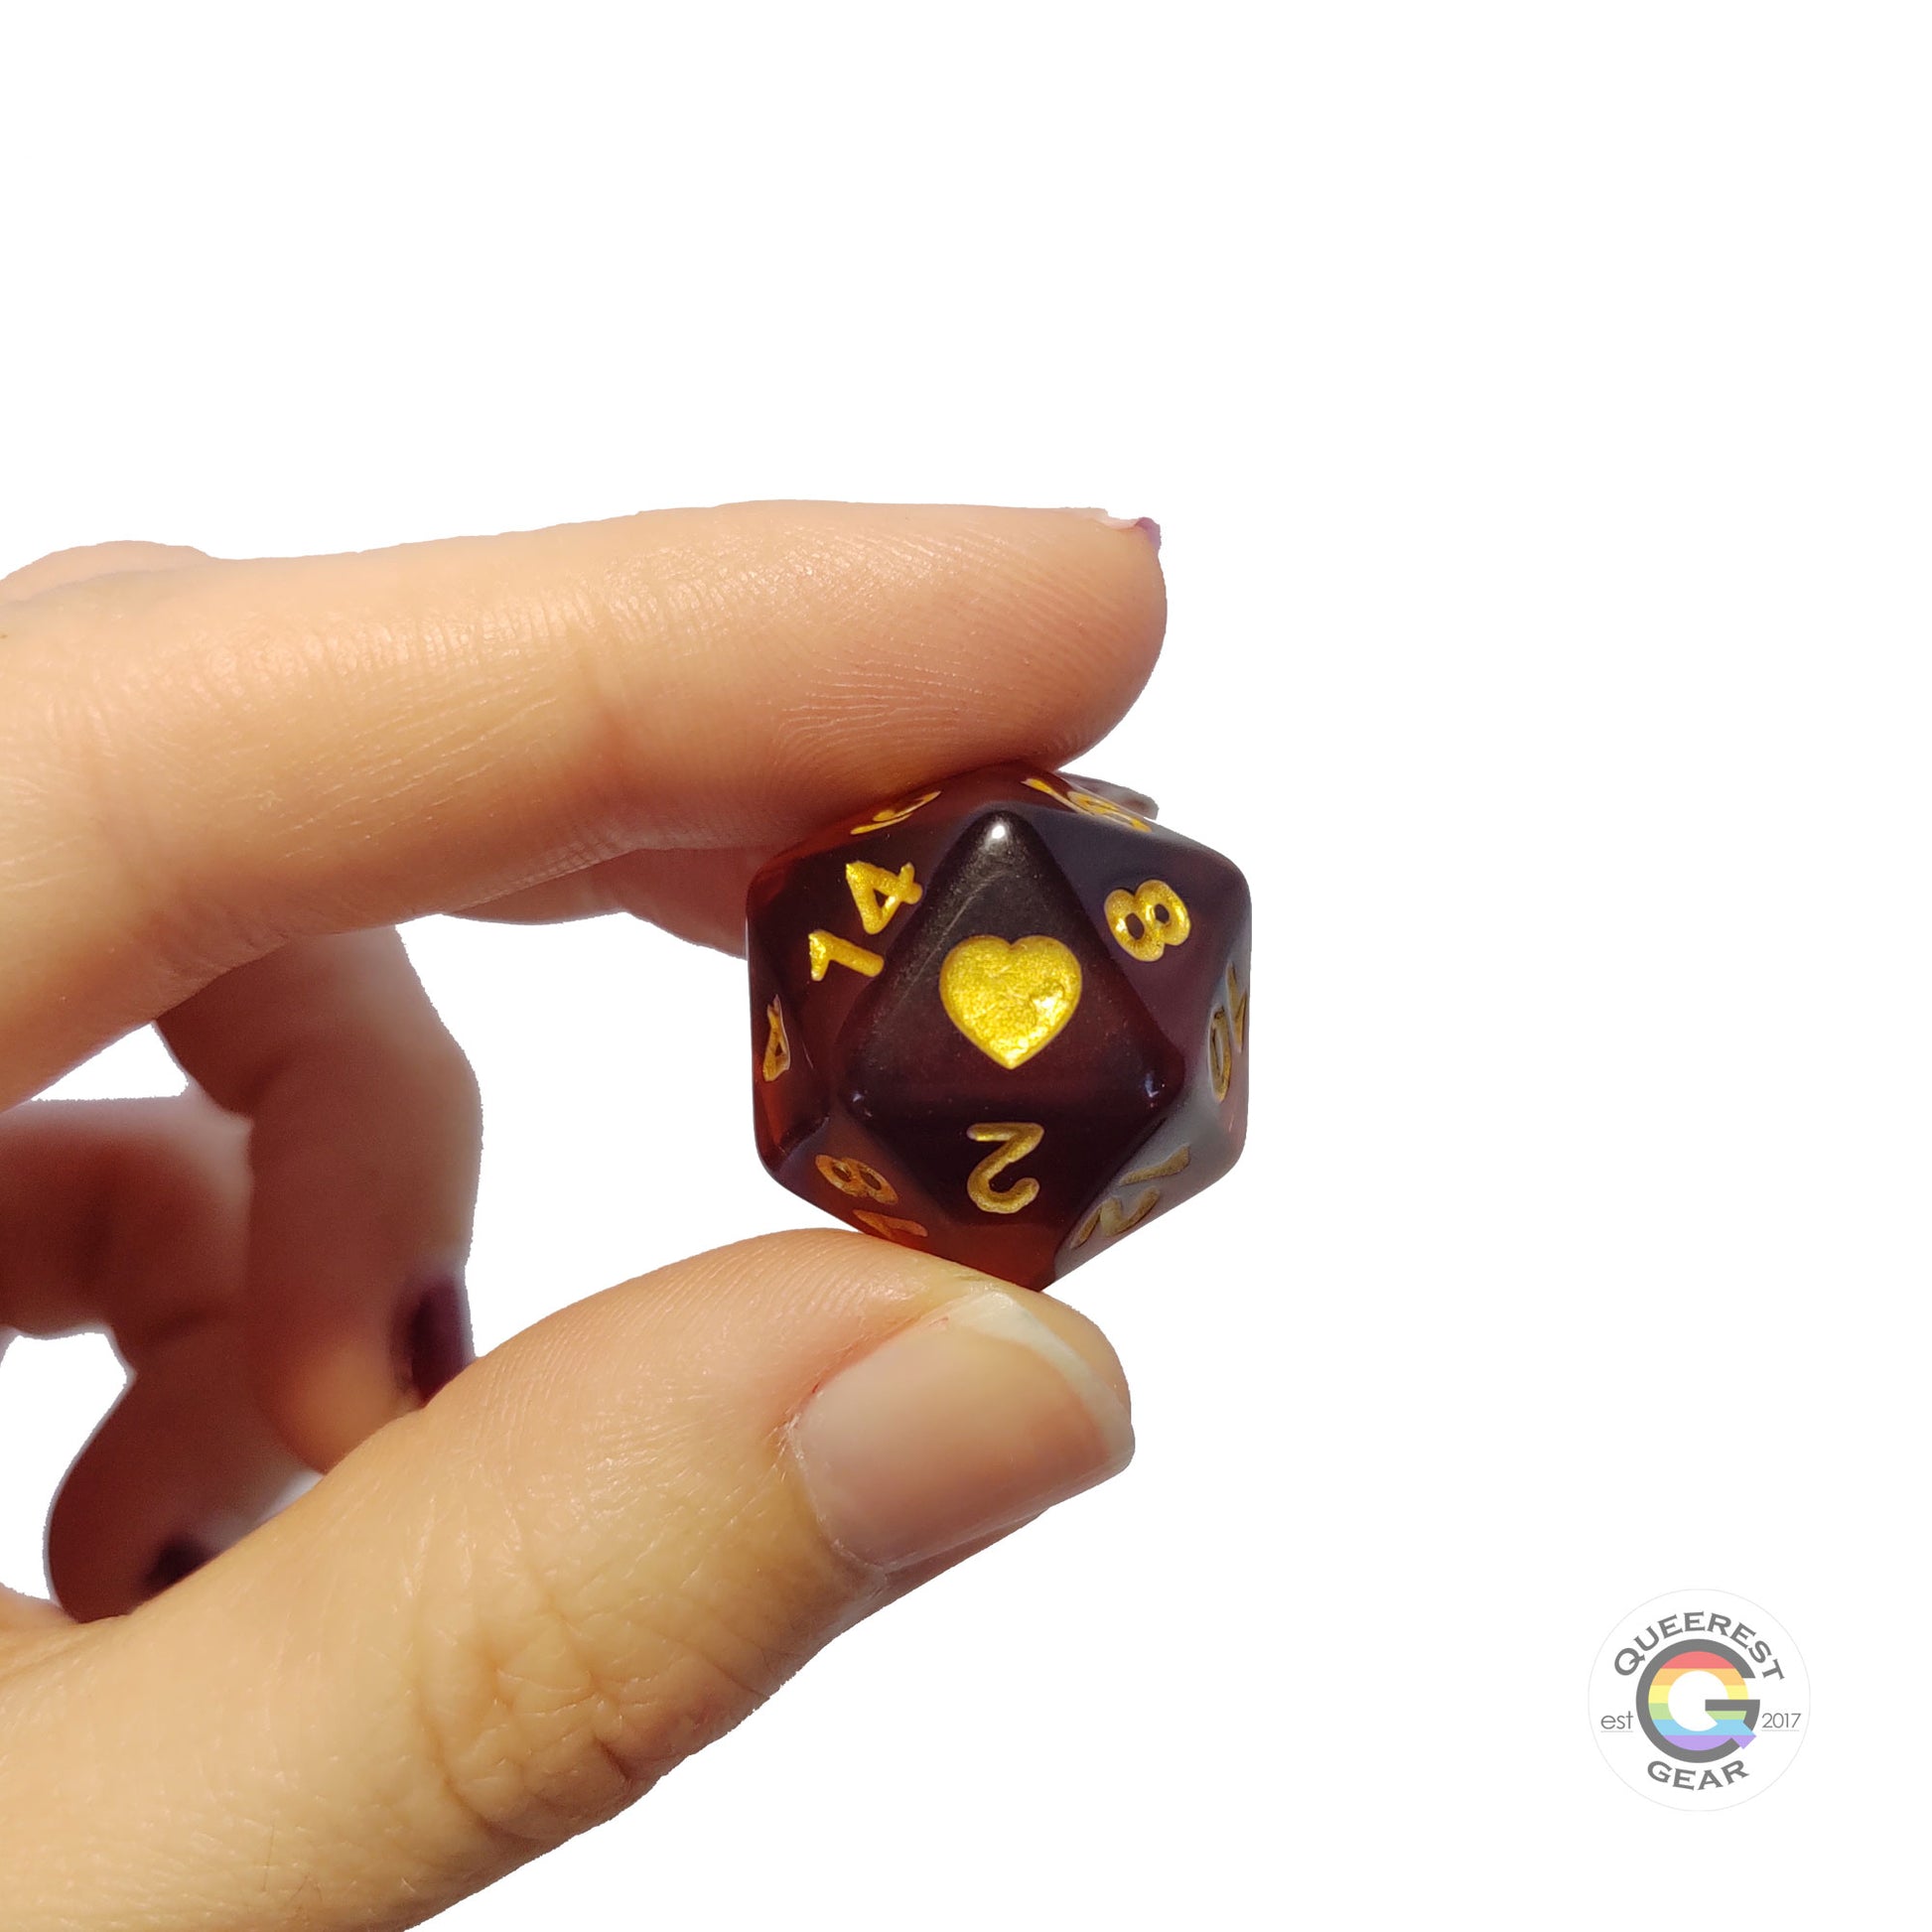  A hand holding up the rainbow d20 to show off the color, heart, and transparency